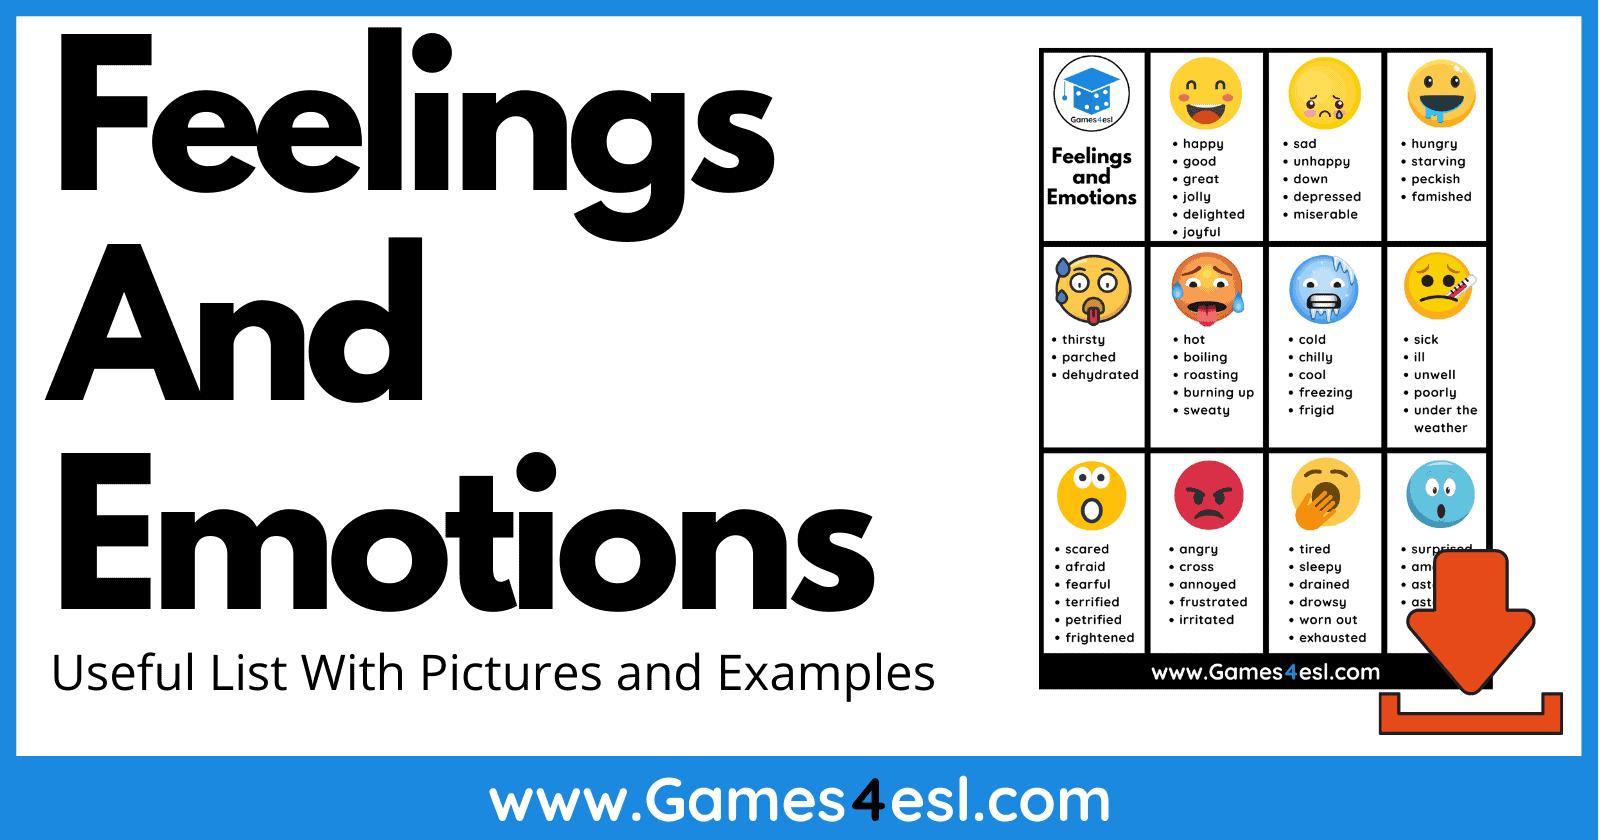 https://games4esl.com/wp-content/uploads/List-Of-Feelings-And-Emotions-in-English.png